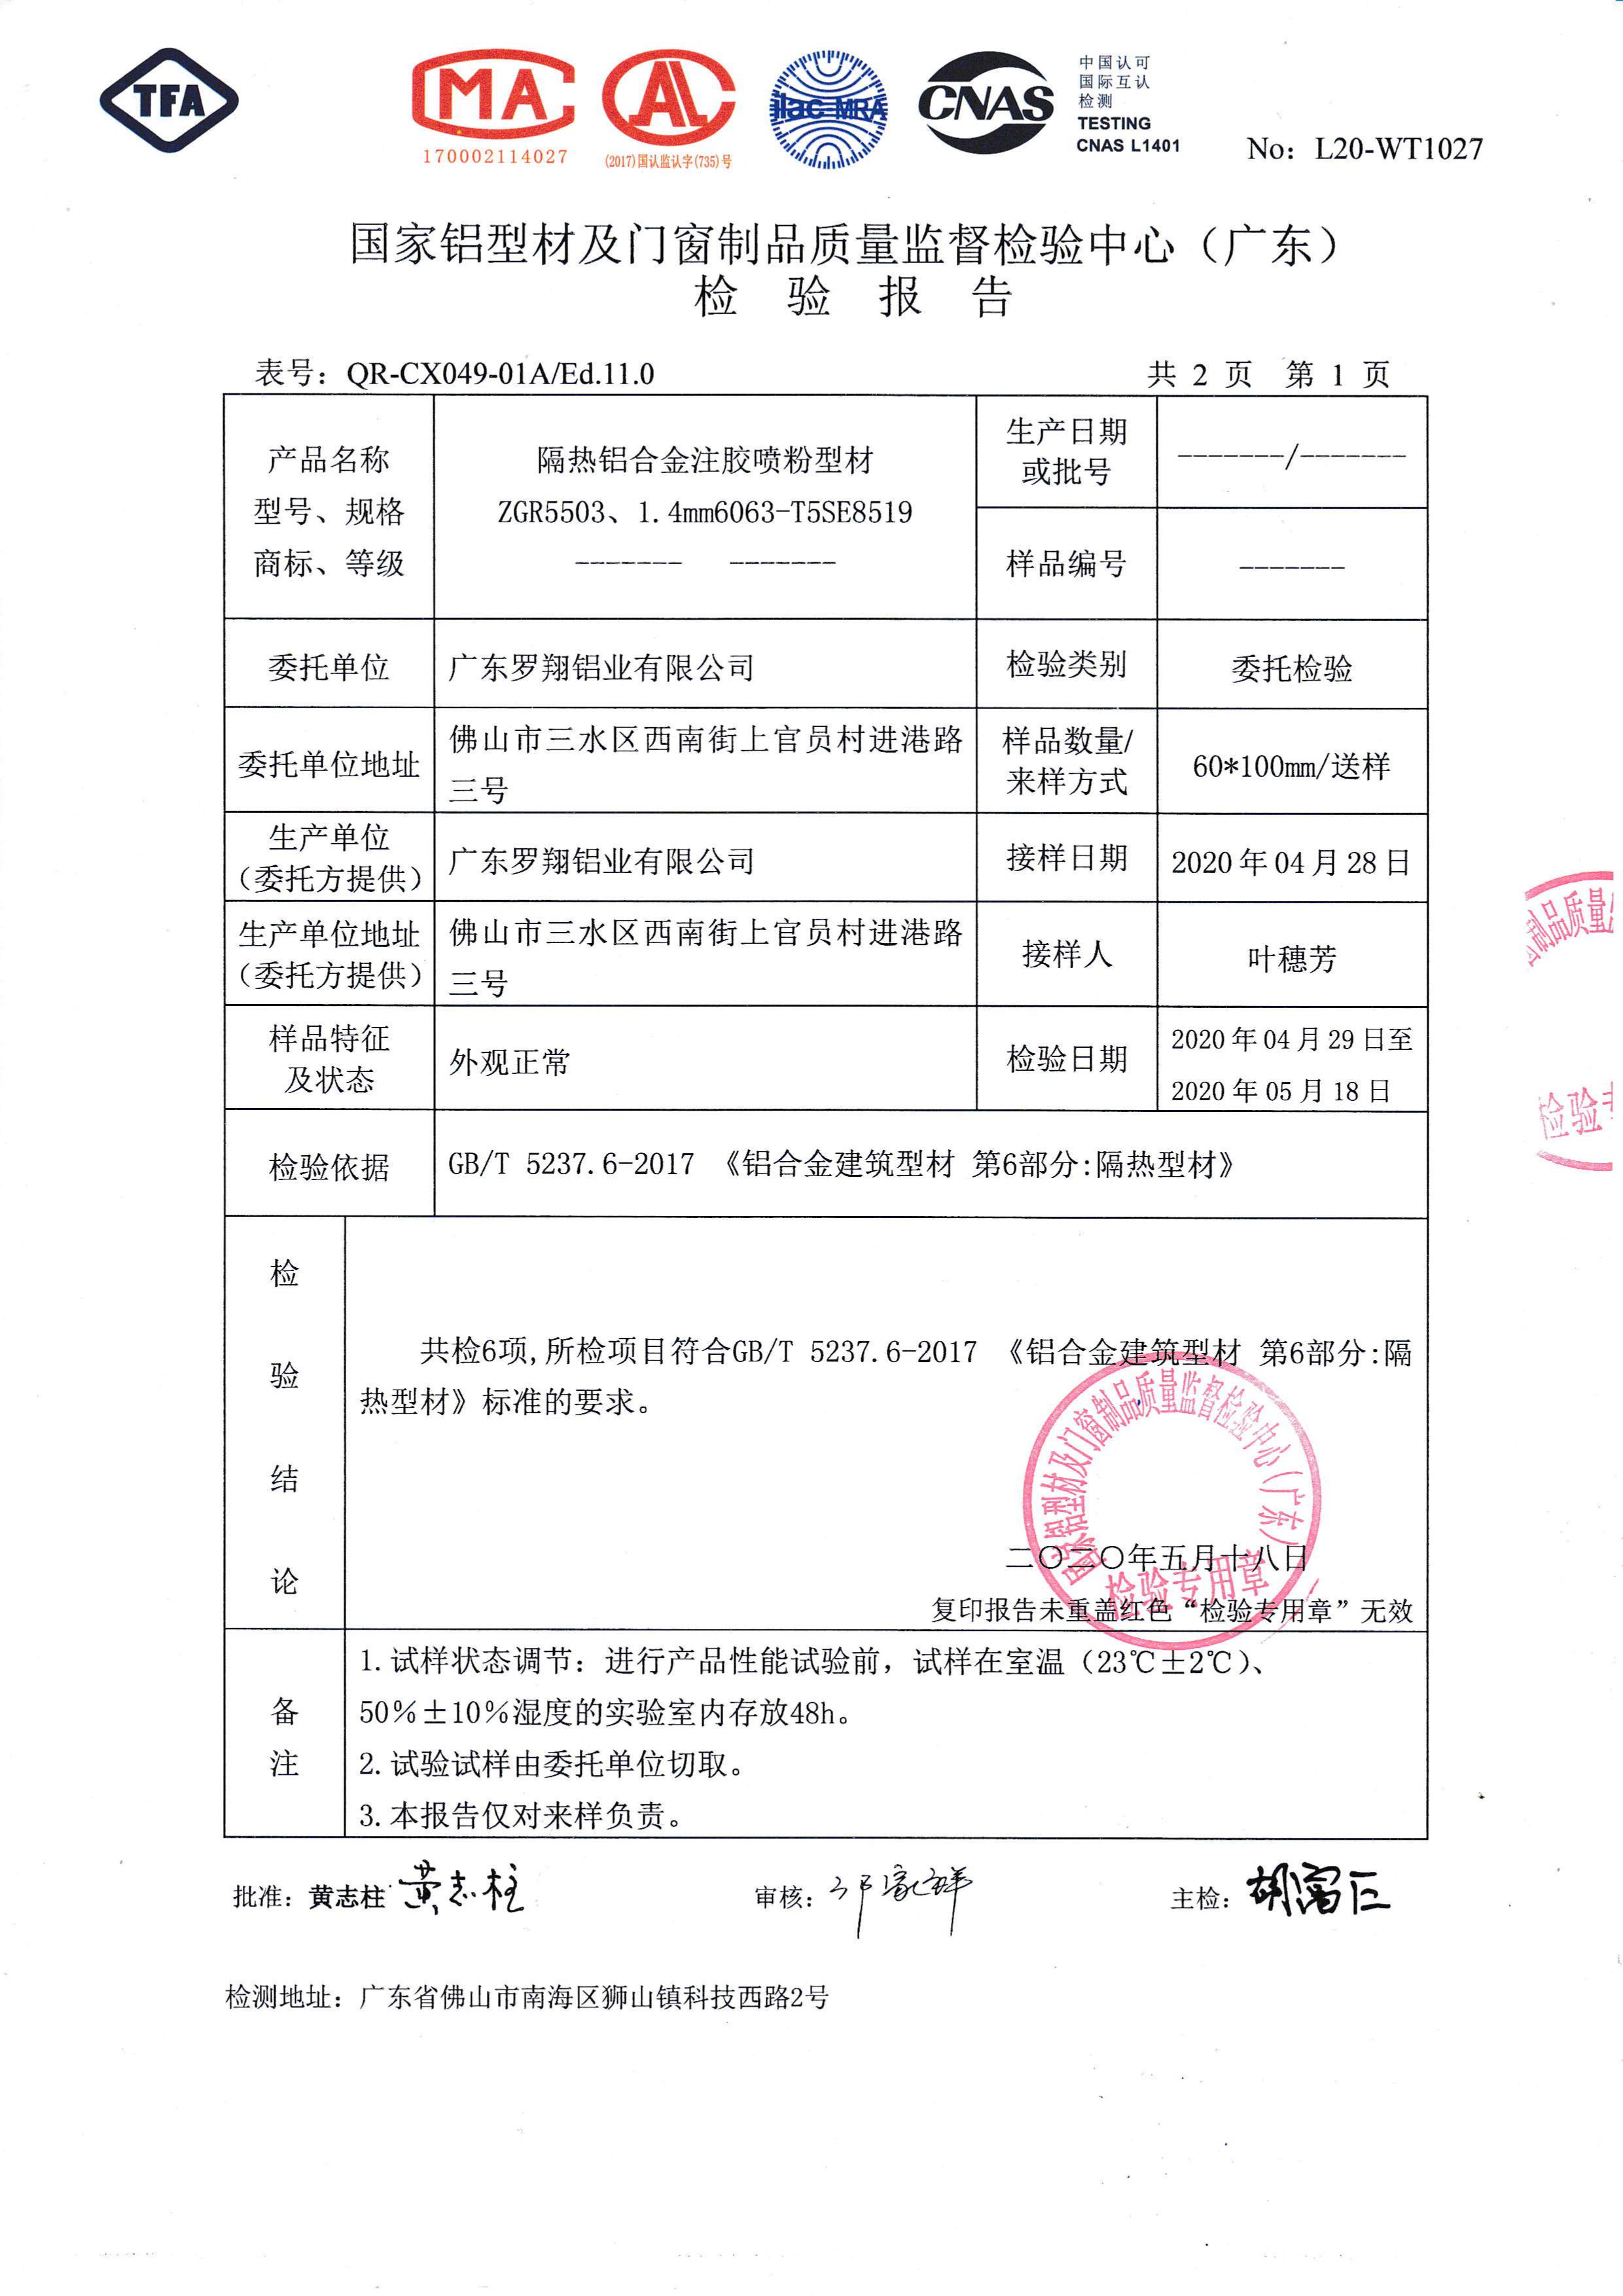 Thermal insulation test report of powder injection and glue injection (2)